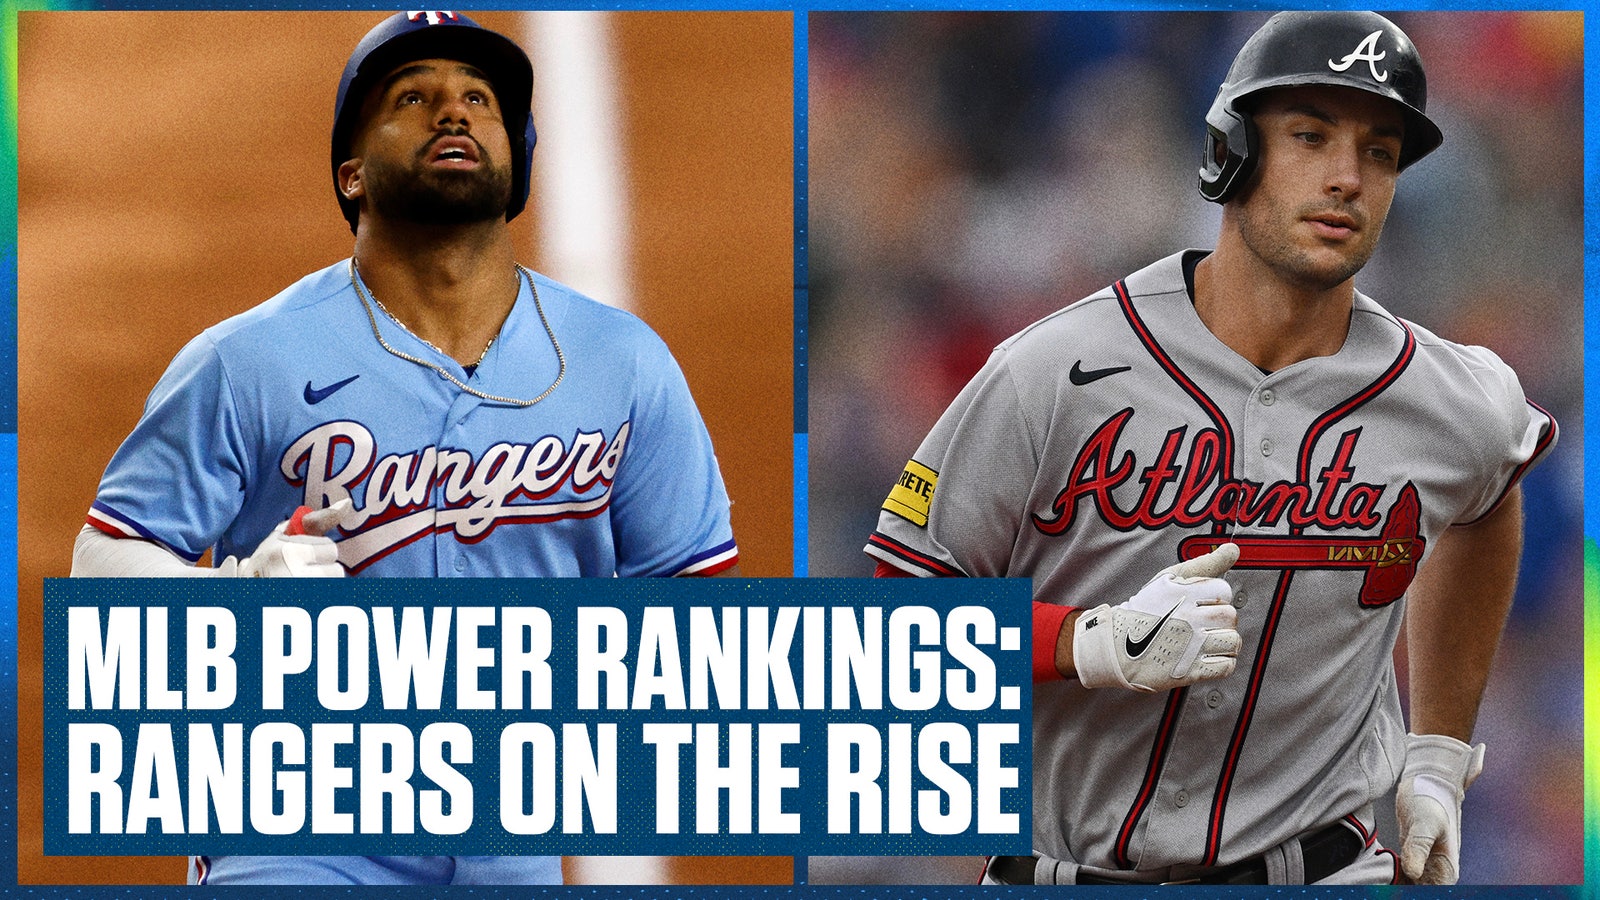 MLB Power Rankings: Washington Nationals close in on Cubs